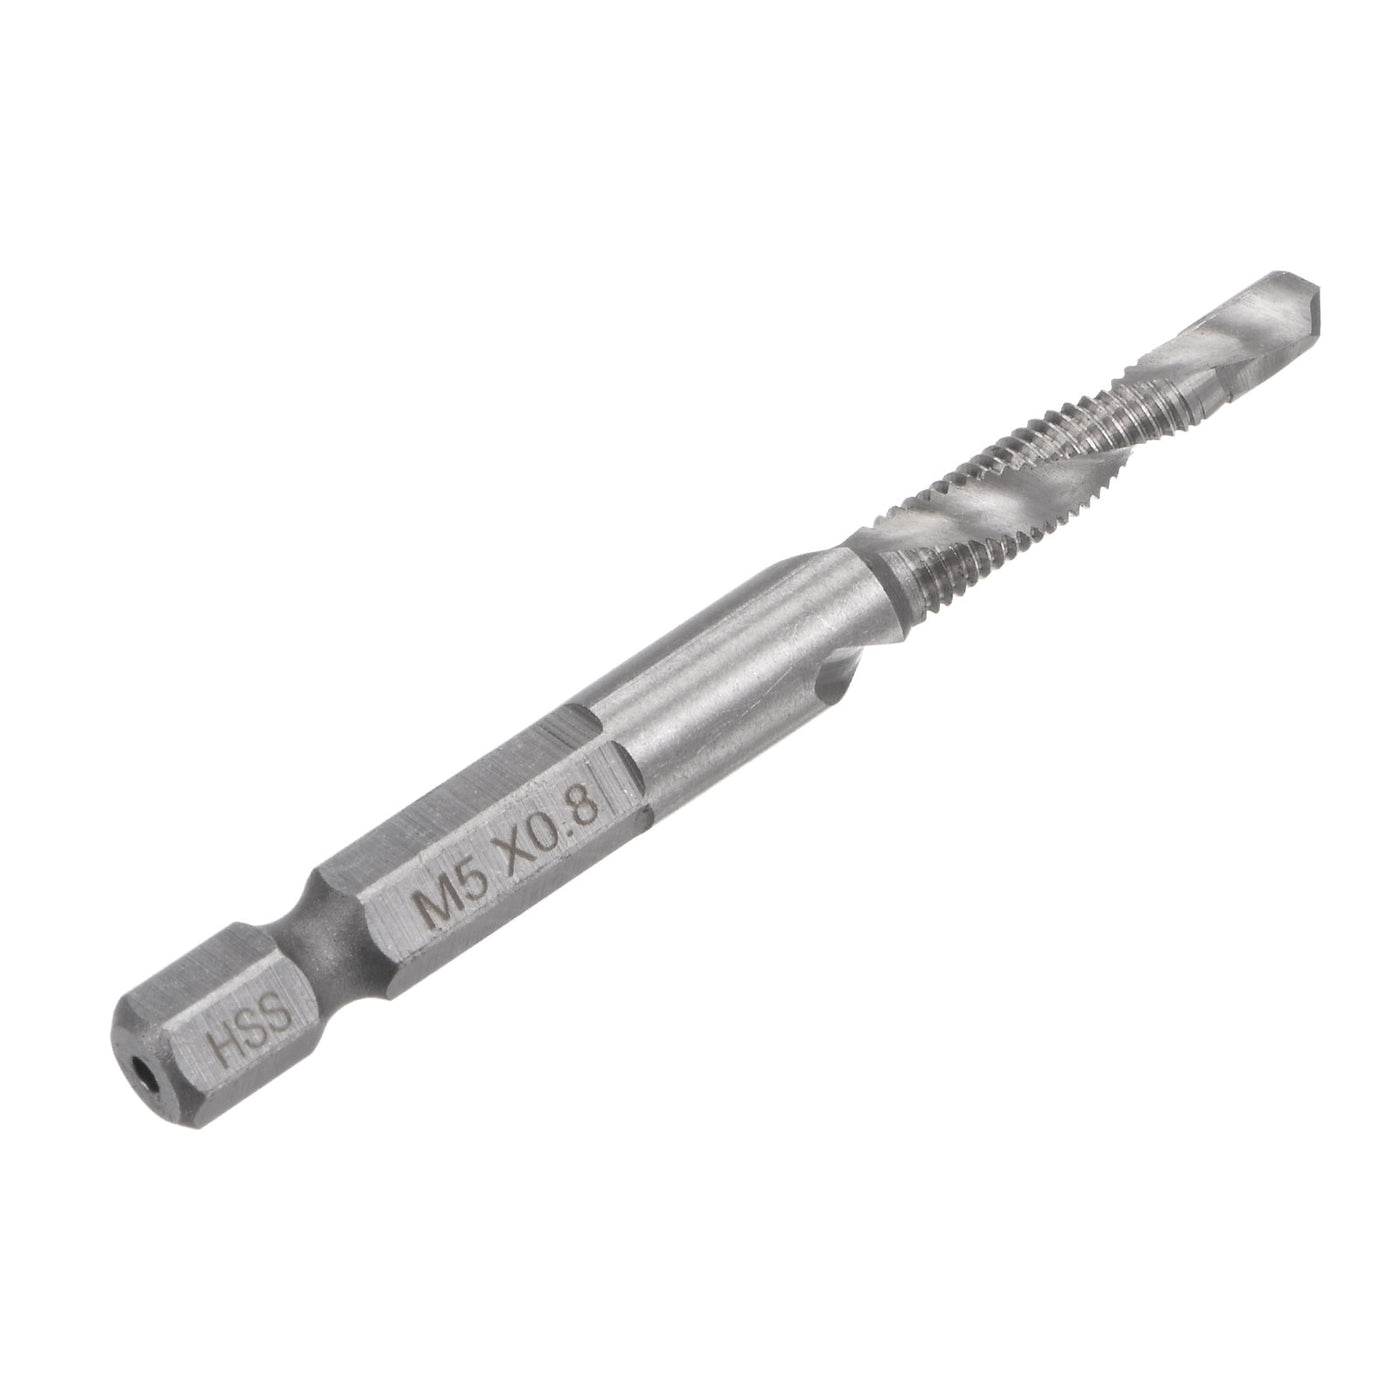 Uxcell Uxcell M5x0.8 High Speed Steel 4341 Combination Drill and Tap Bit Extra Long